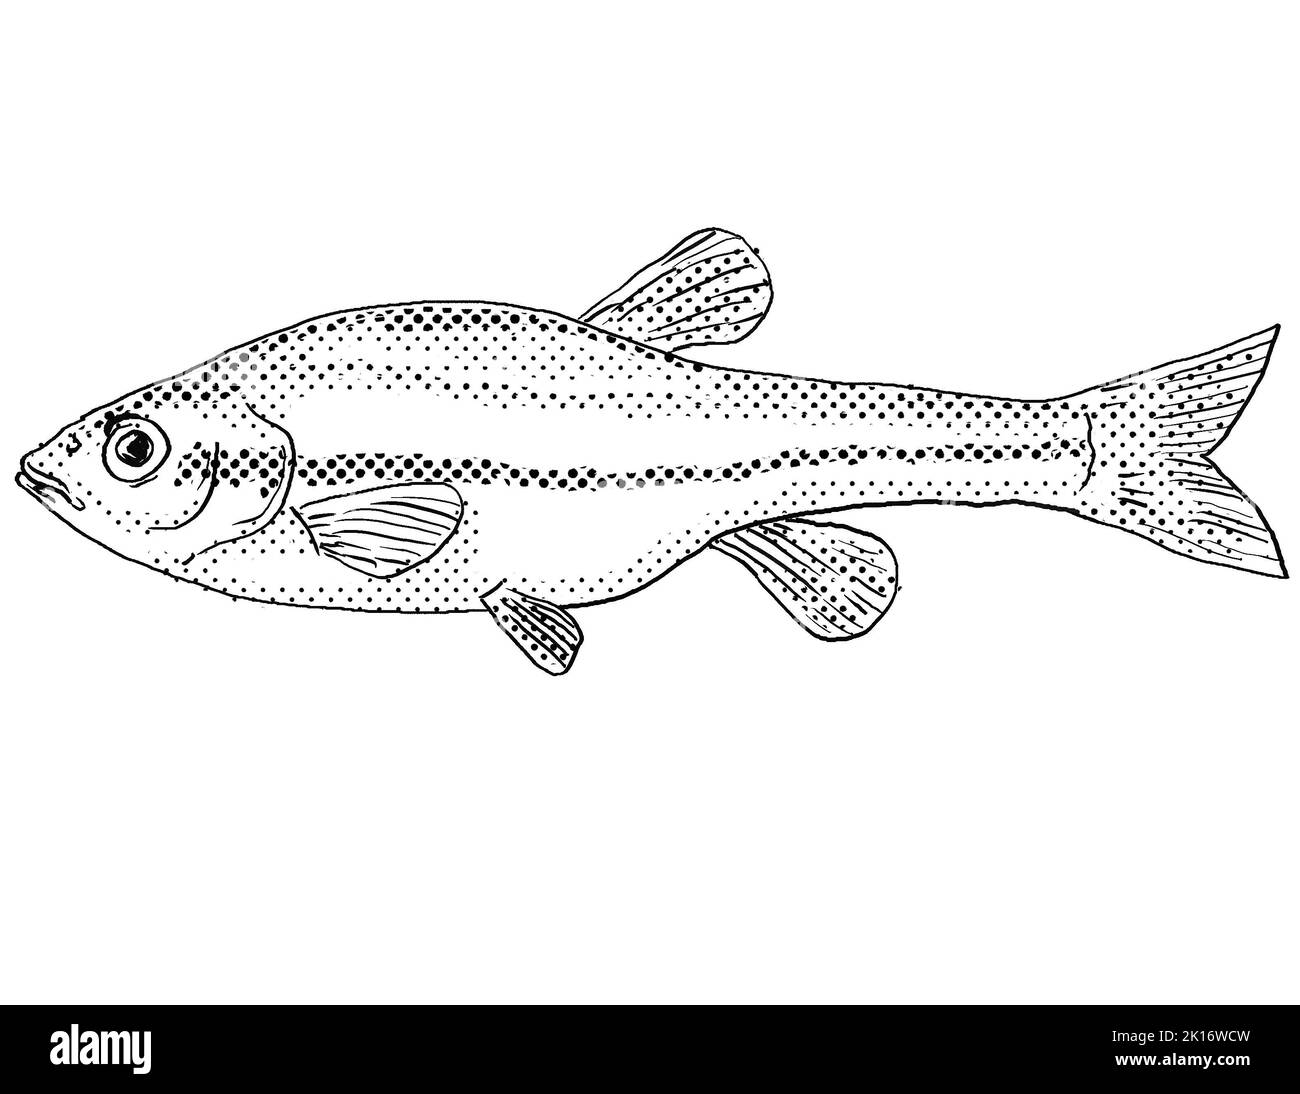 Cartoon style line drawing of a finescale dace or Chrosomus neogaeus freshwater fish endemic to North America with halftone dots shading on isolated b Stock Photo